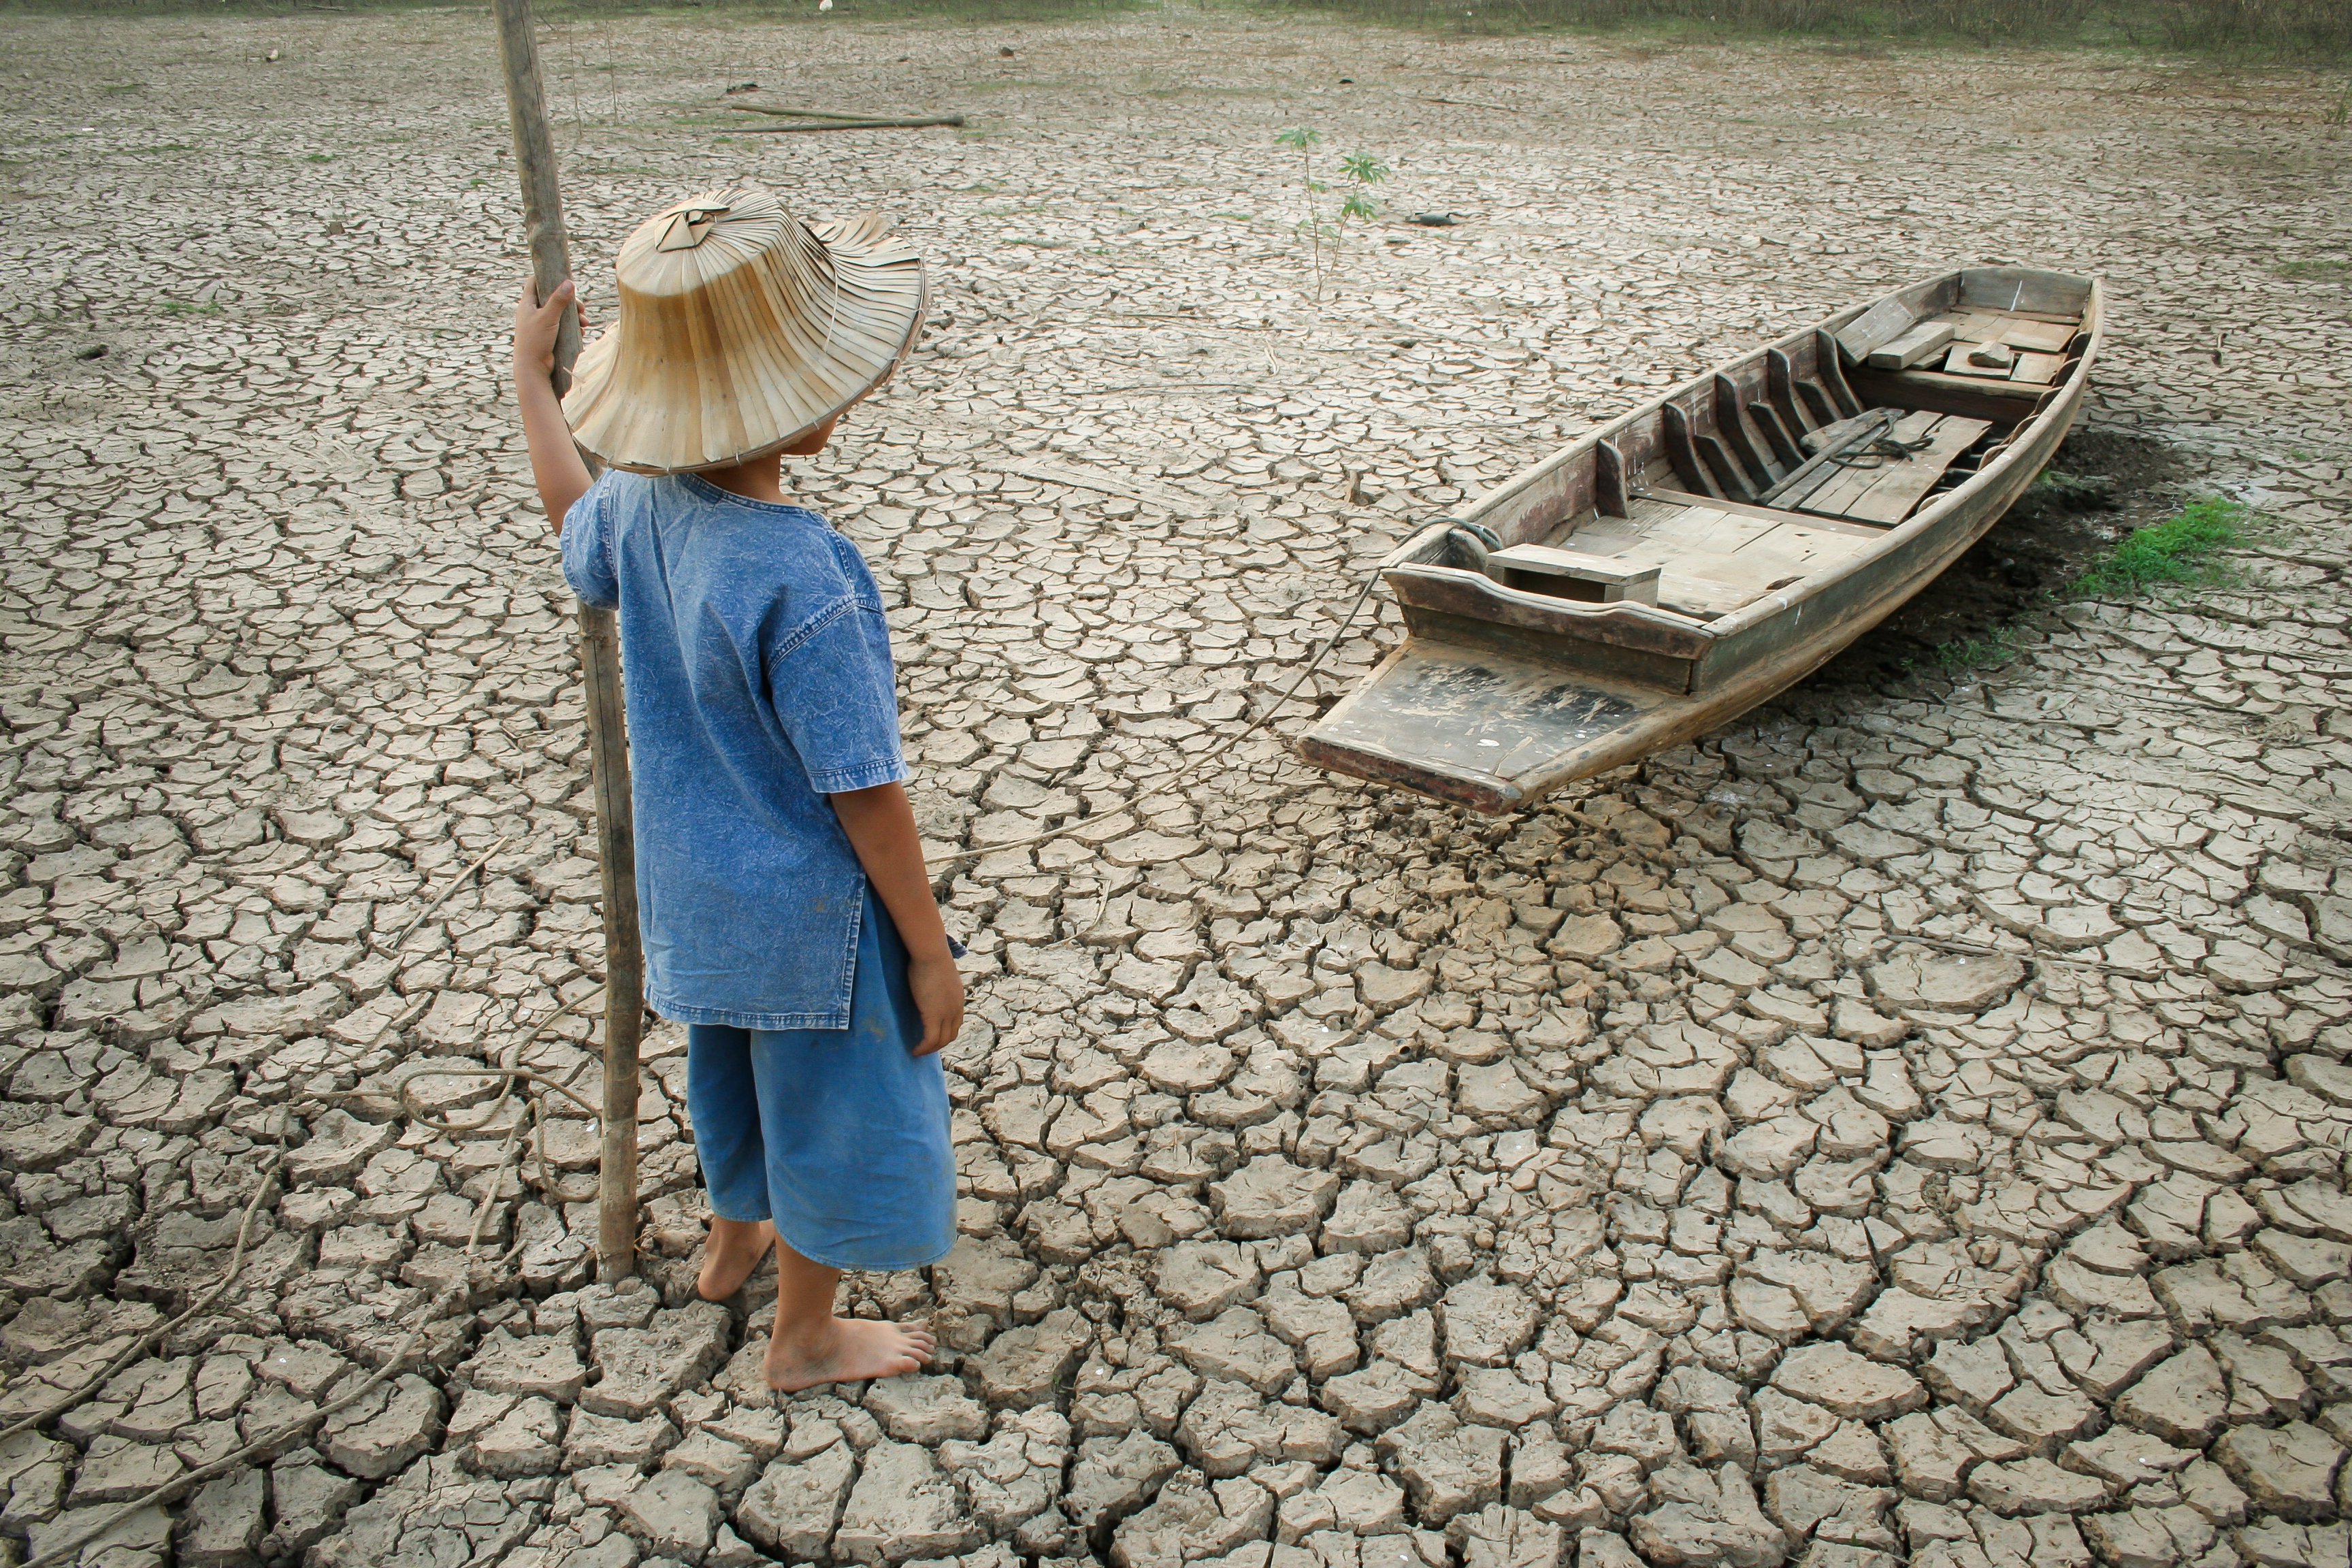 A child looks out over a dried up lake